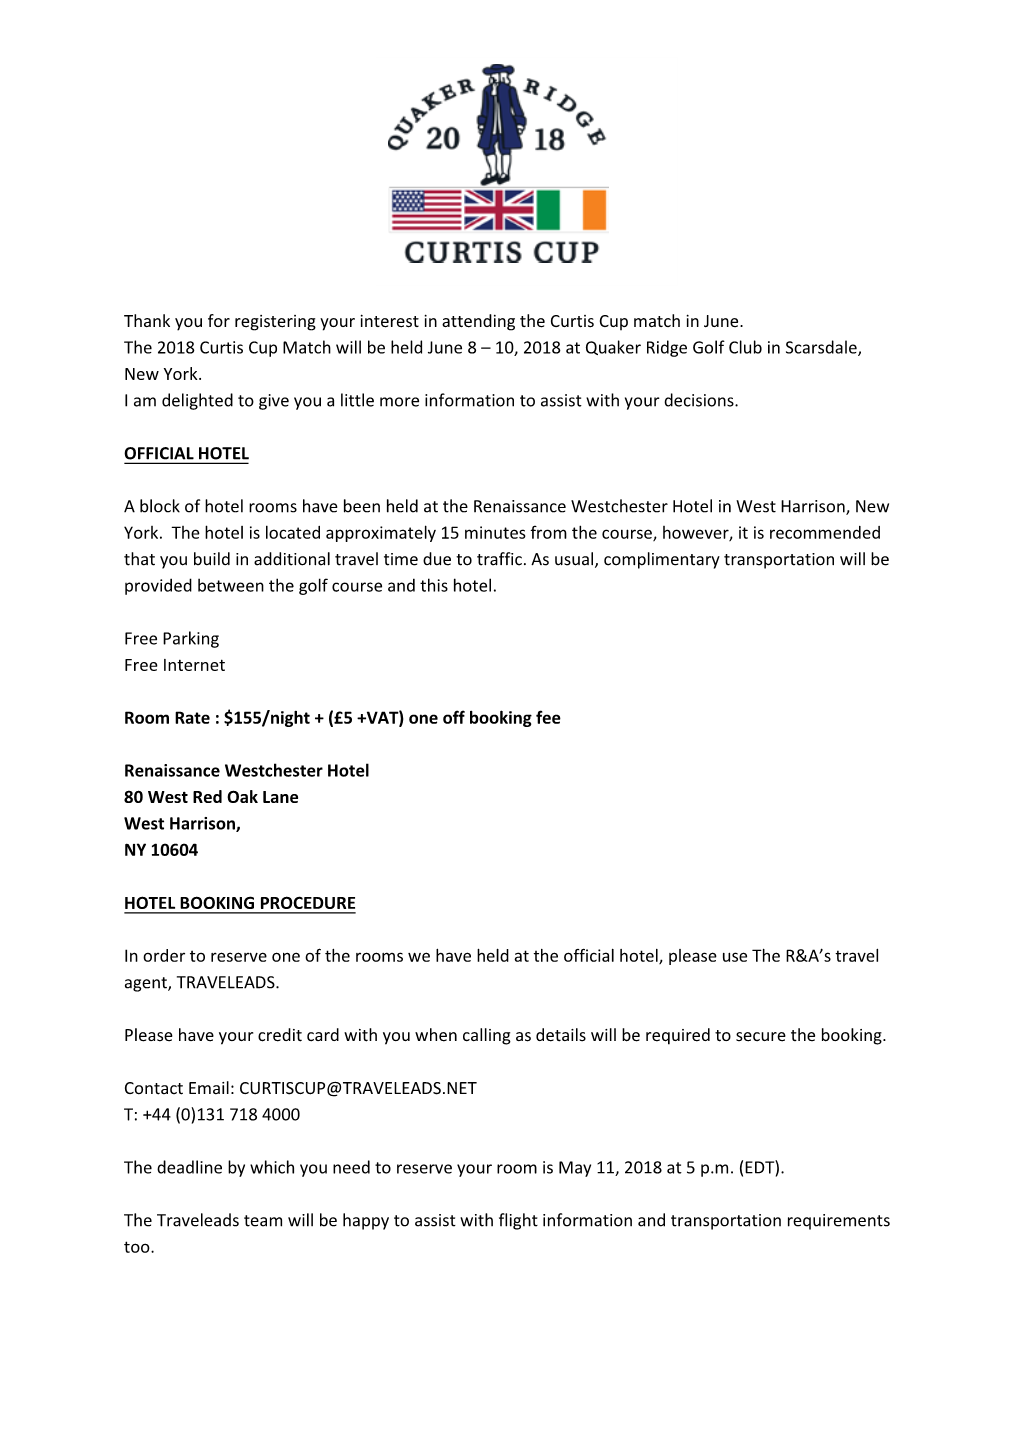 Thank You for Registering Your Interest in Attending the Curtis Cup Match in June